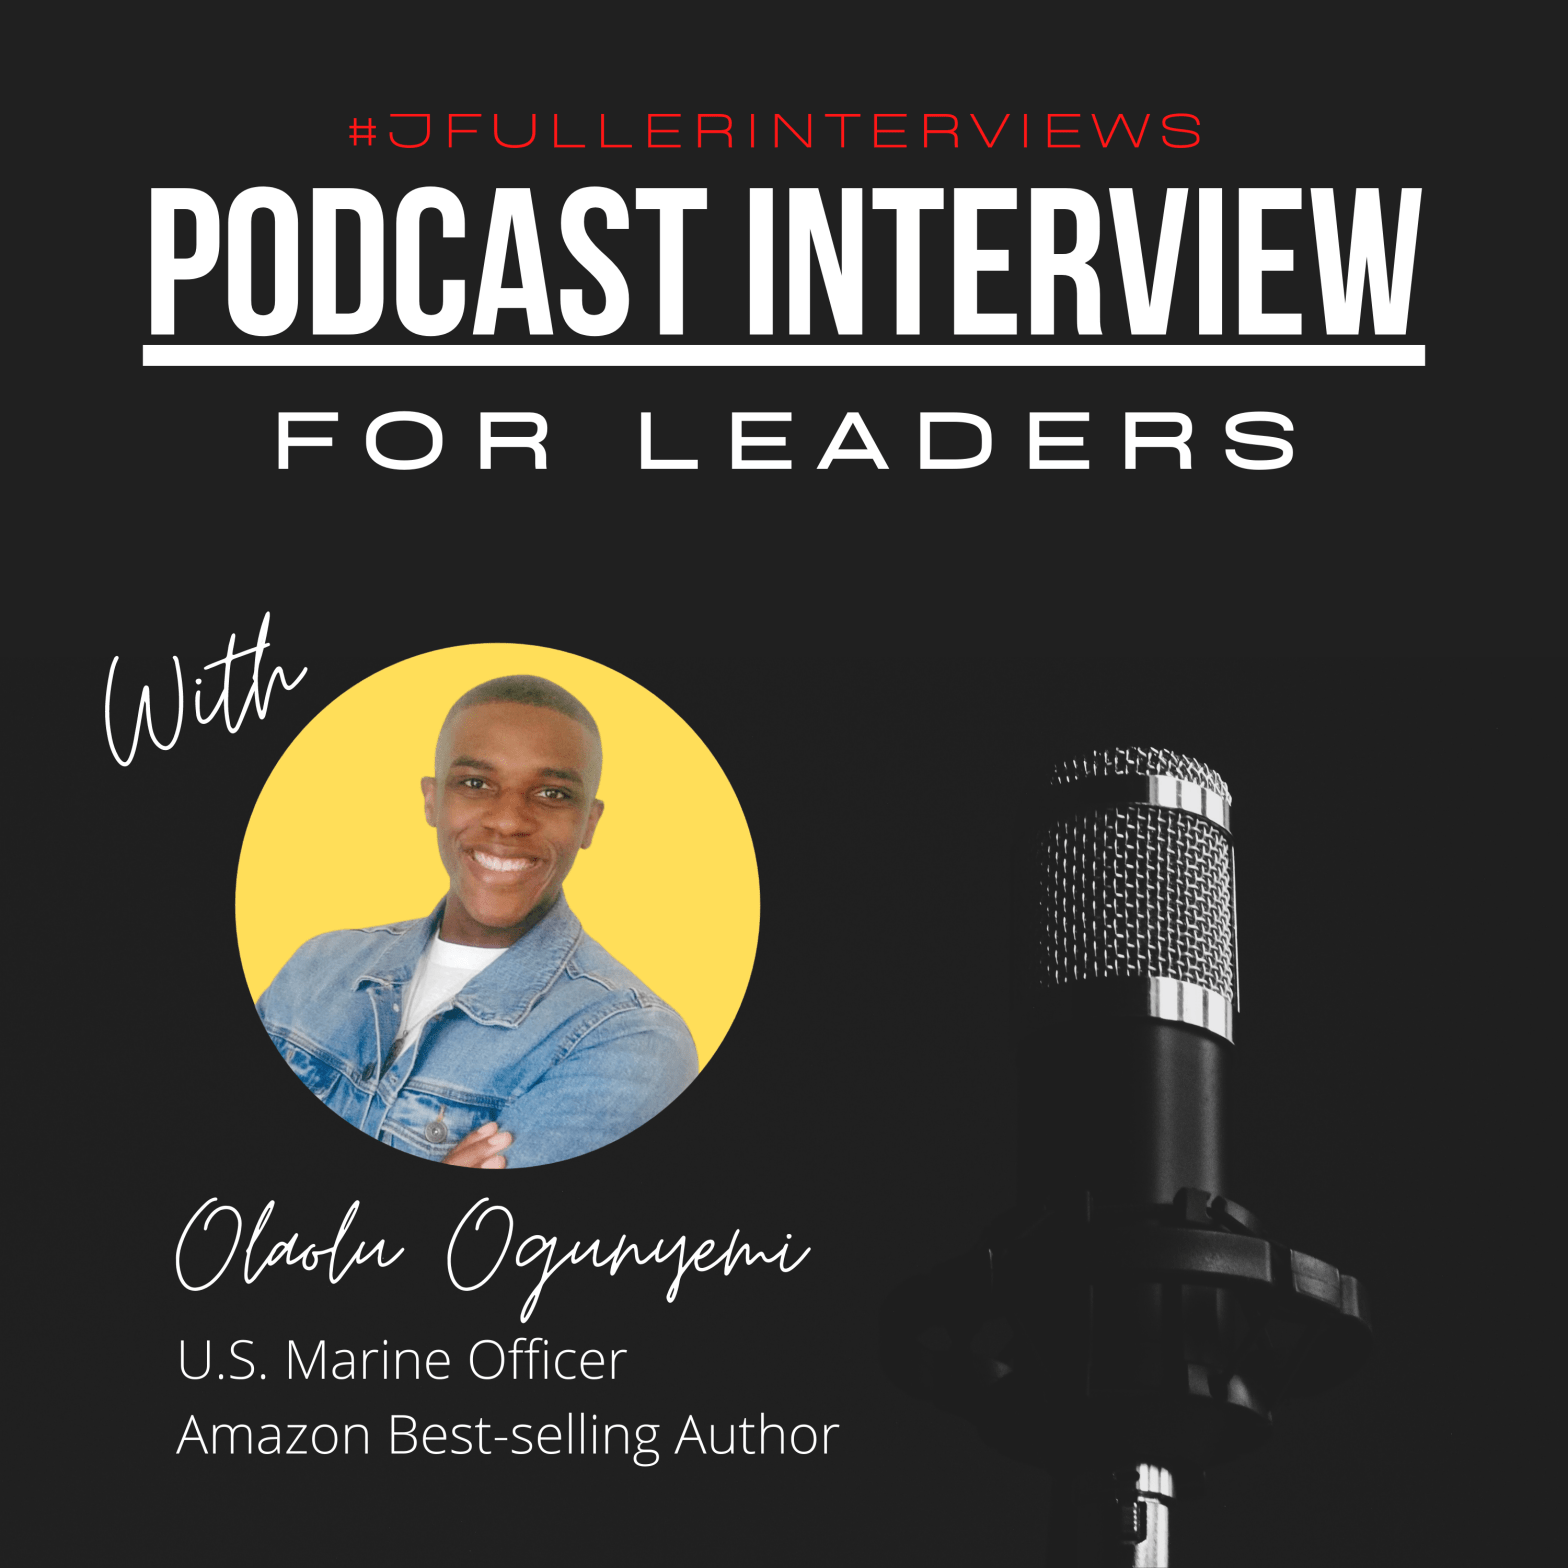 Newest podcast interview for leaders!